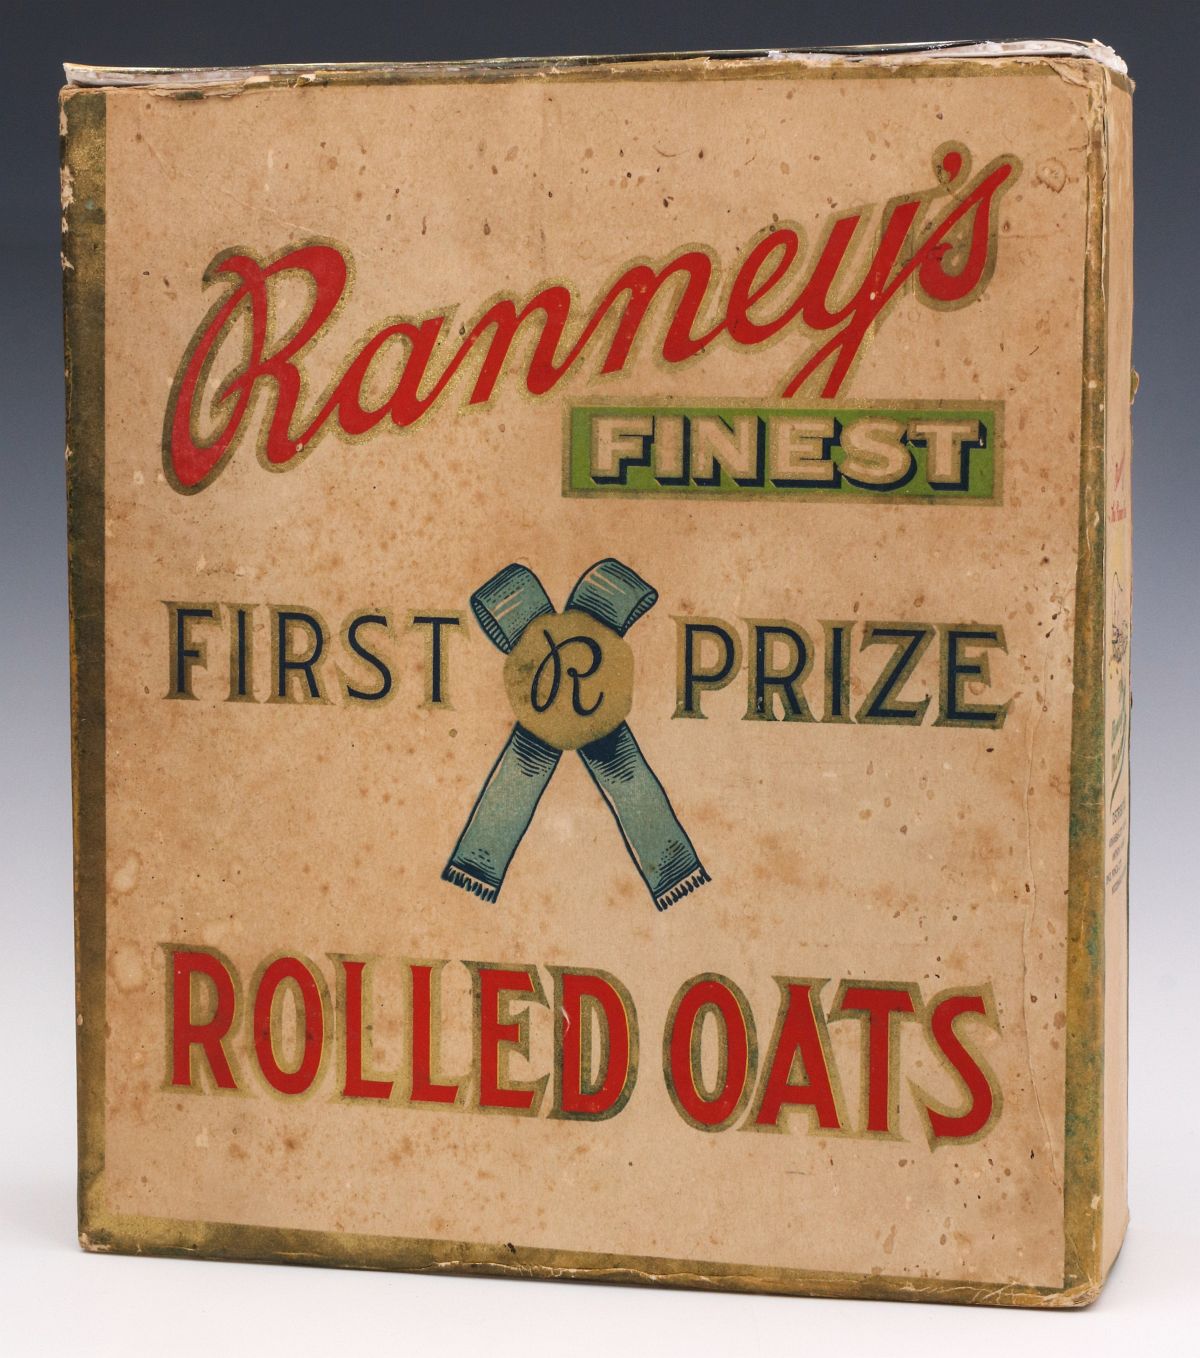 A RANNEY'S FINEST ROLLED OATS CONTAINER C. 1900s